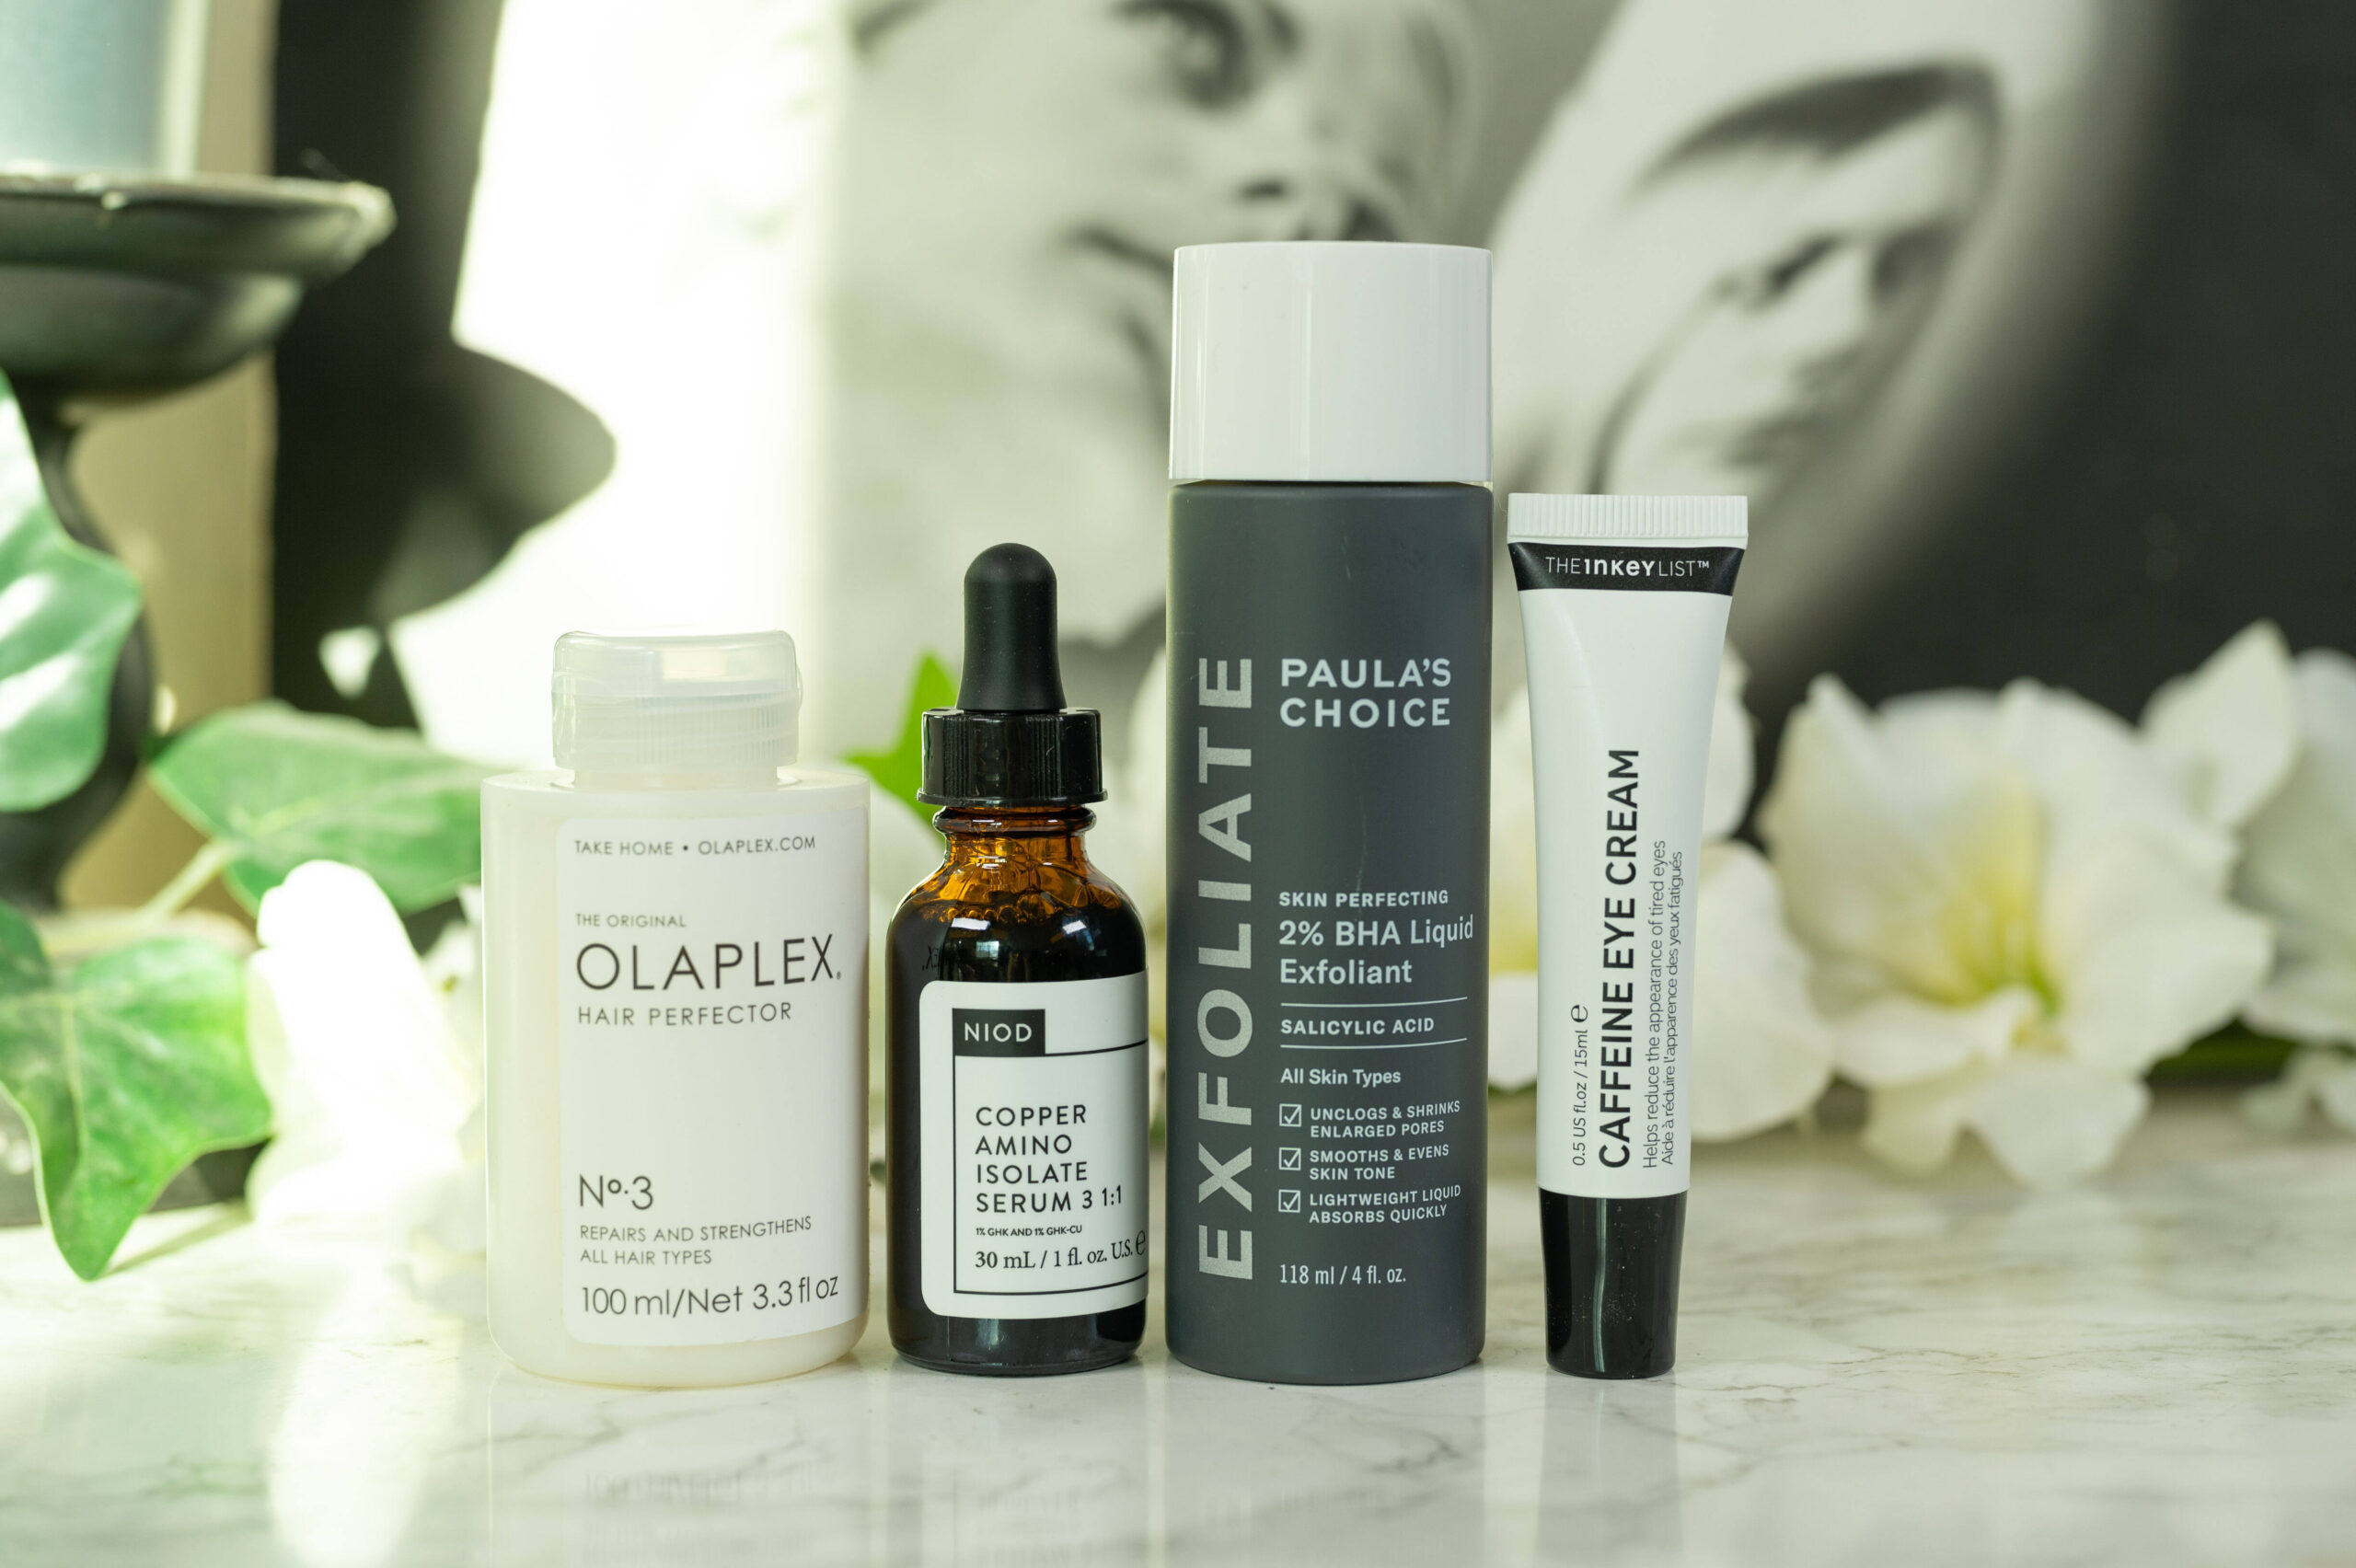 Skincare from Paula's Choice, The Inkey List and NIOD as well as hair care from Olaplex lined up in front of a dark background with white flowers